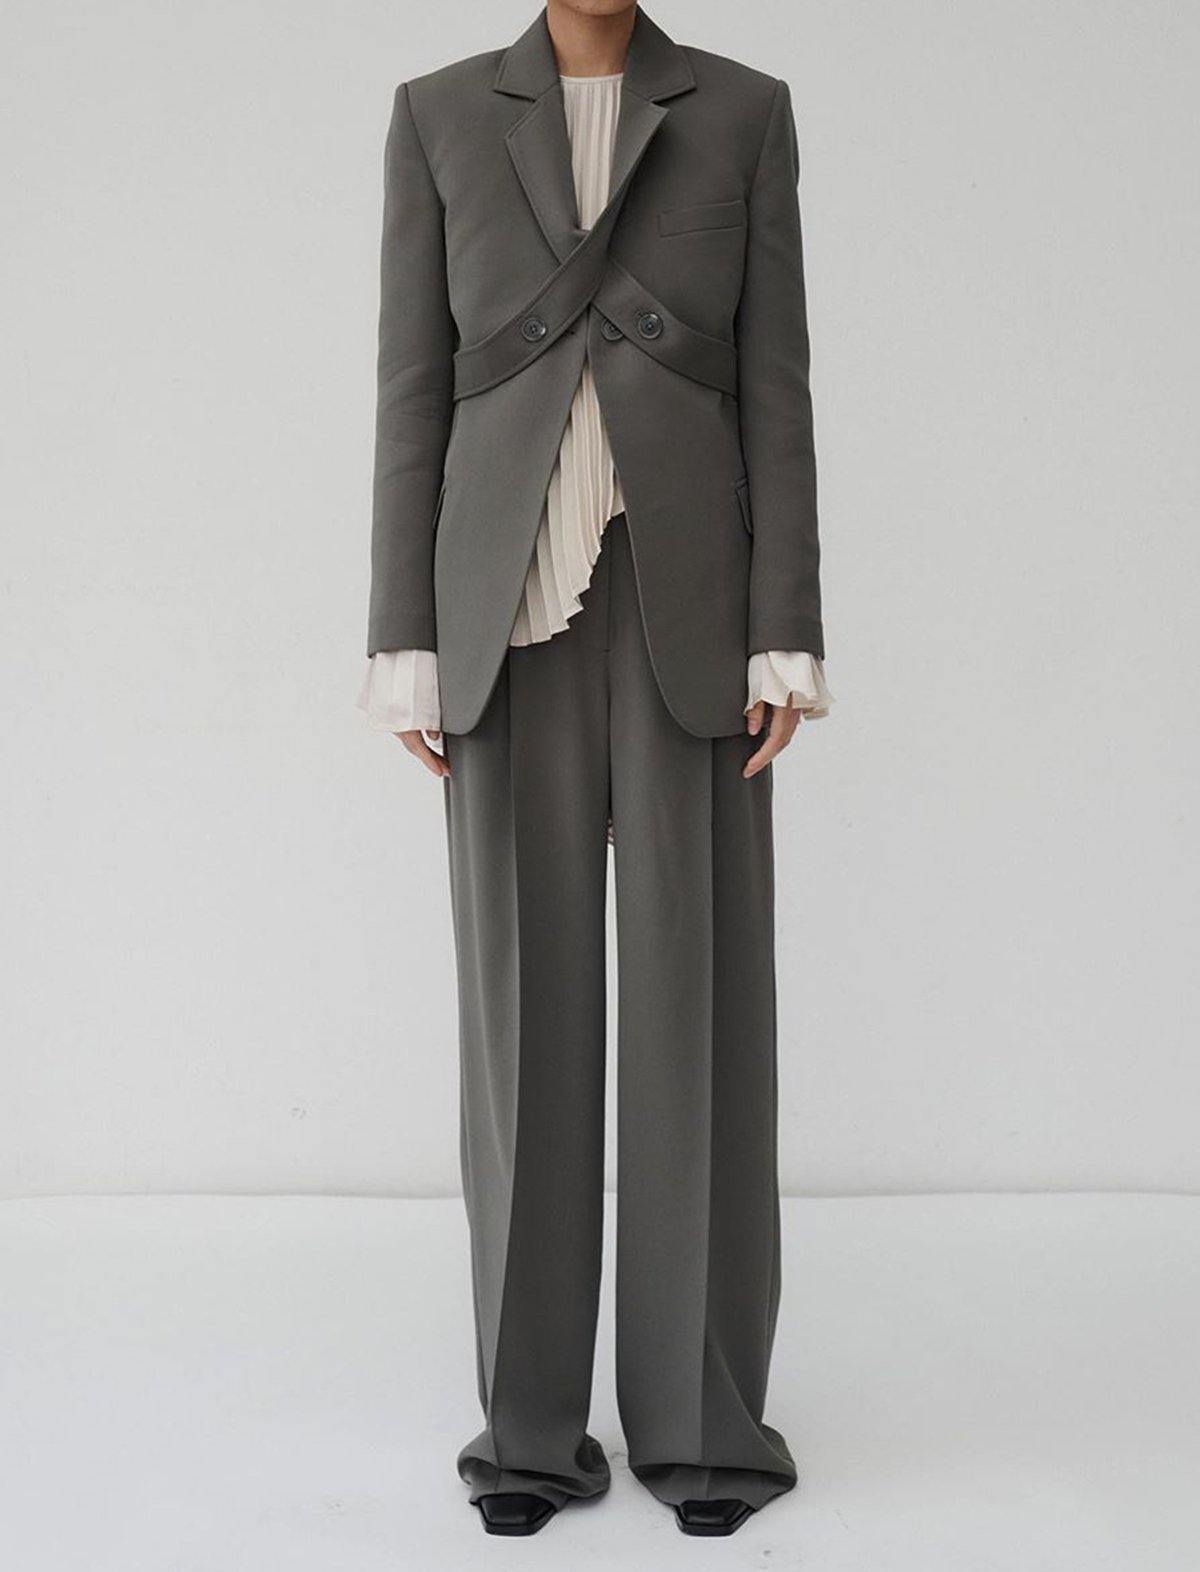 BEAUFILLE Burnell Trouser in Pewter Grey | CLOSET Singapore